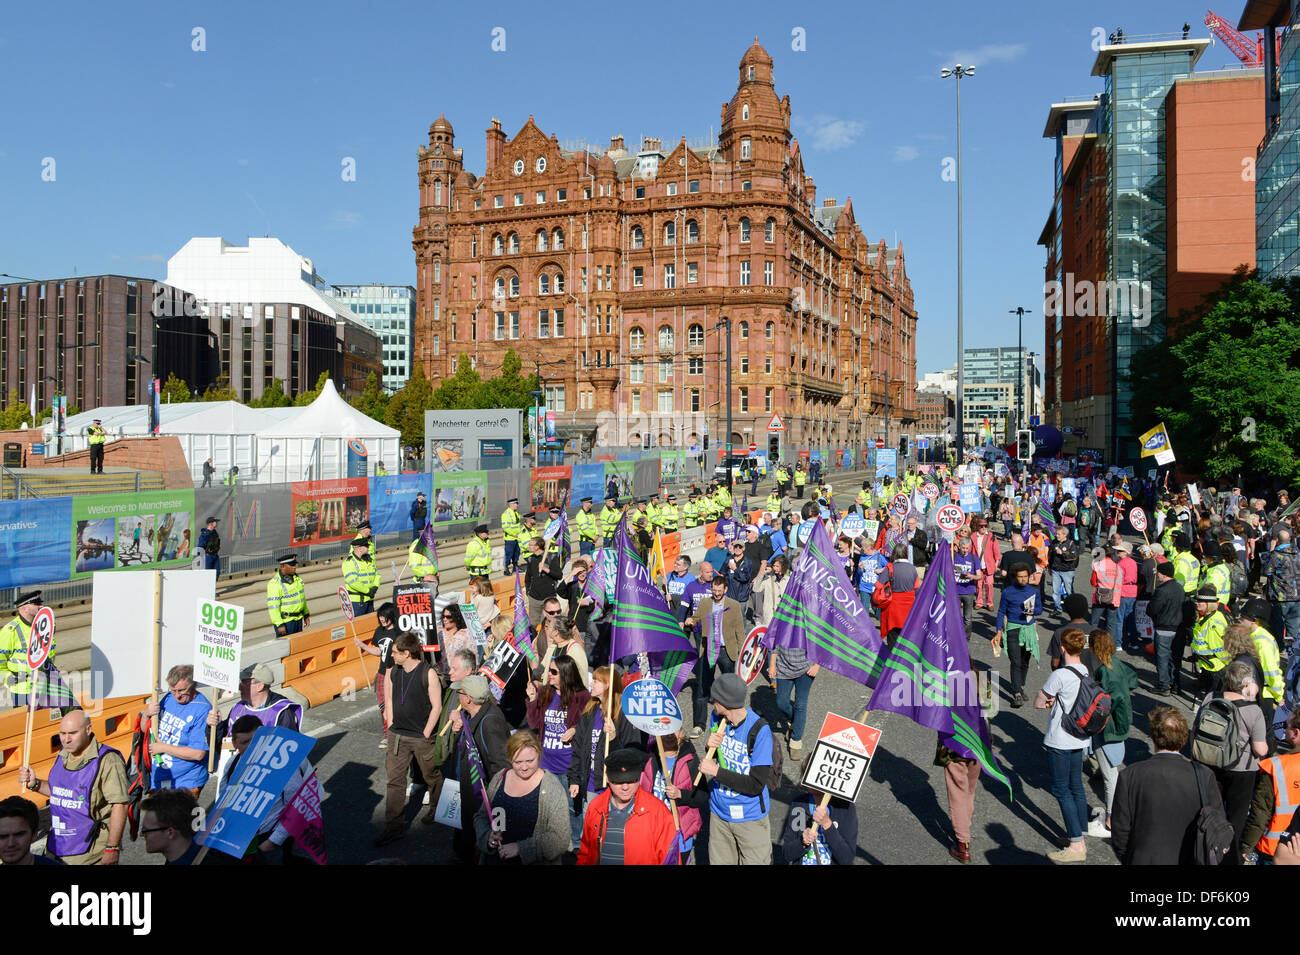 Manchester, UK. 29th Sept 2013. A view of Lower Mosley Street including the Midland Hotel during a North West TUC organised march and rally intending to defend National Health Service (NHS) jobs and services from cuts and privatisation. The march coincides with the Conservative Party Conference 2013 being held in the city. Credit:  Russell Hart/Alamy Live News. Stock Photo